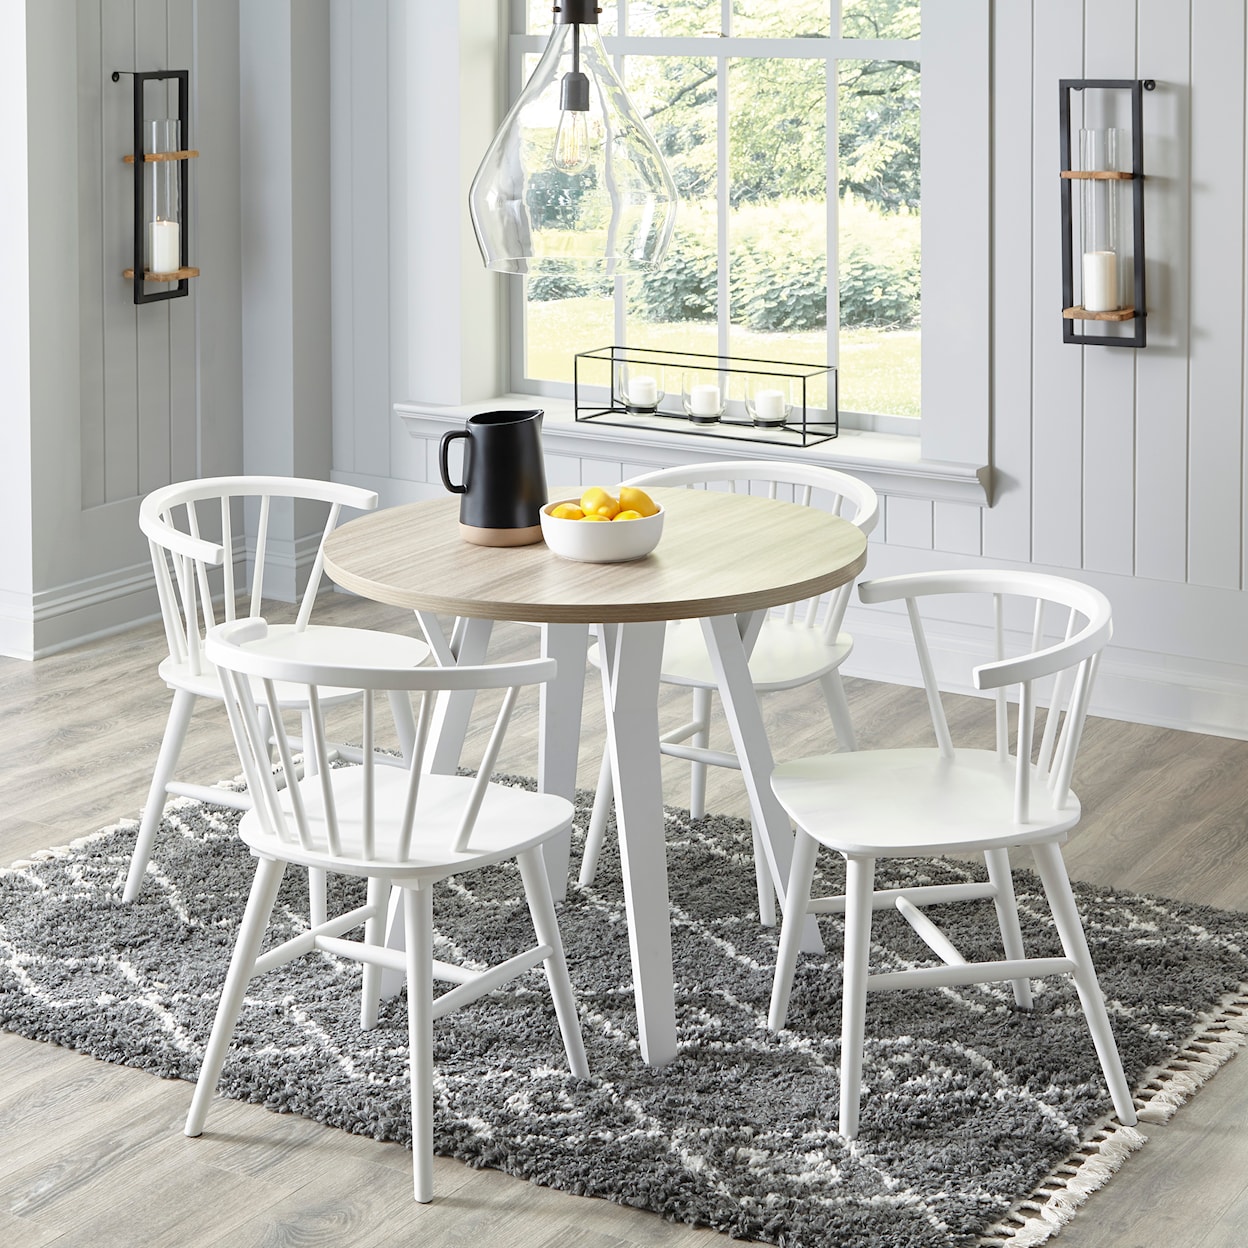 Signature Design by Ashley Furniture Grannen Dining Table and 4 Chairs